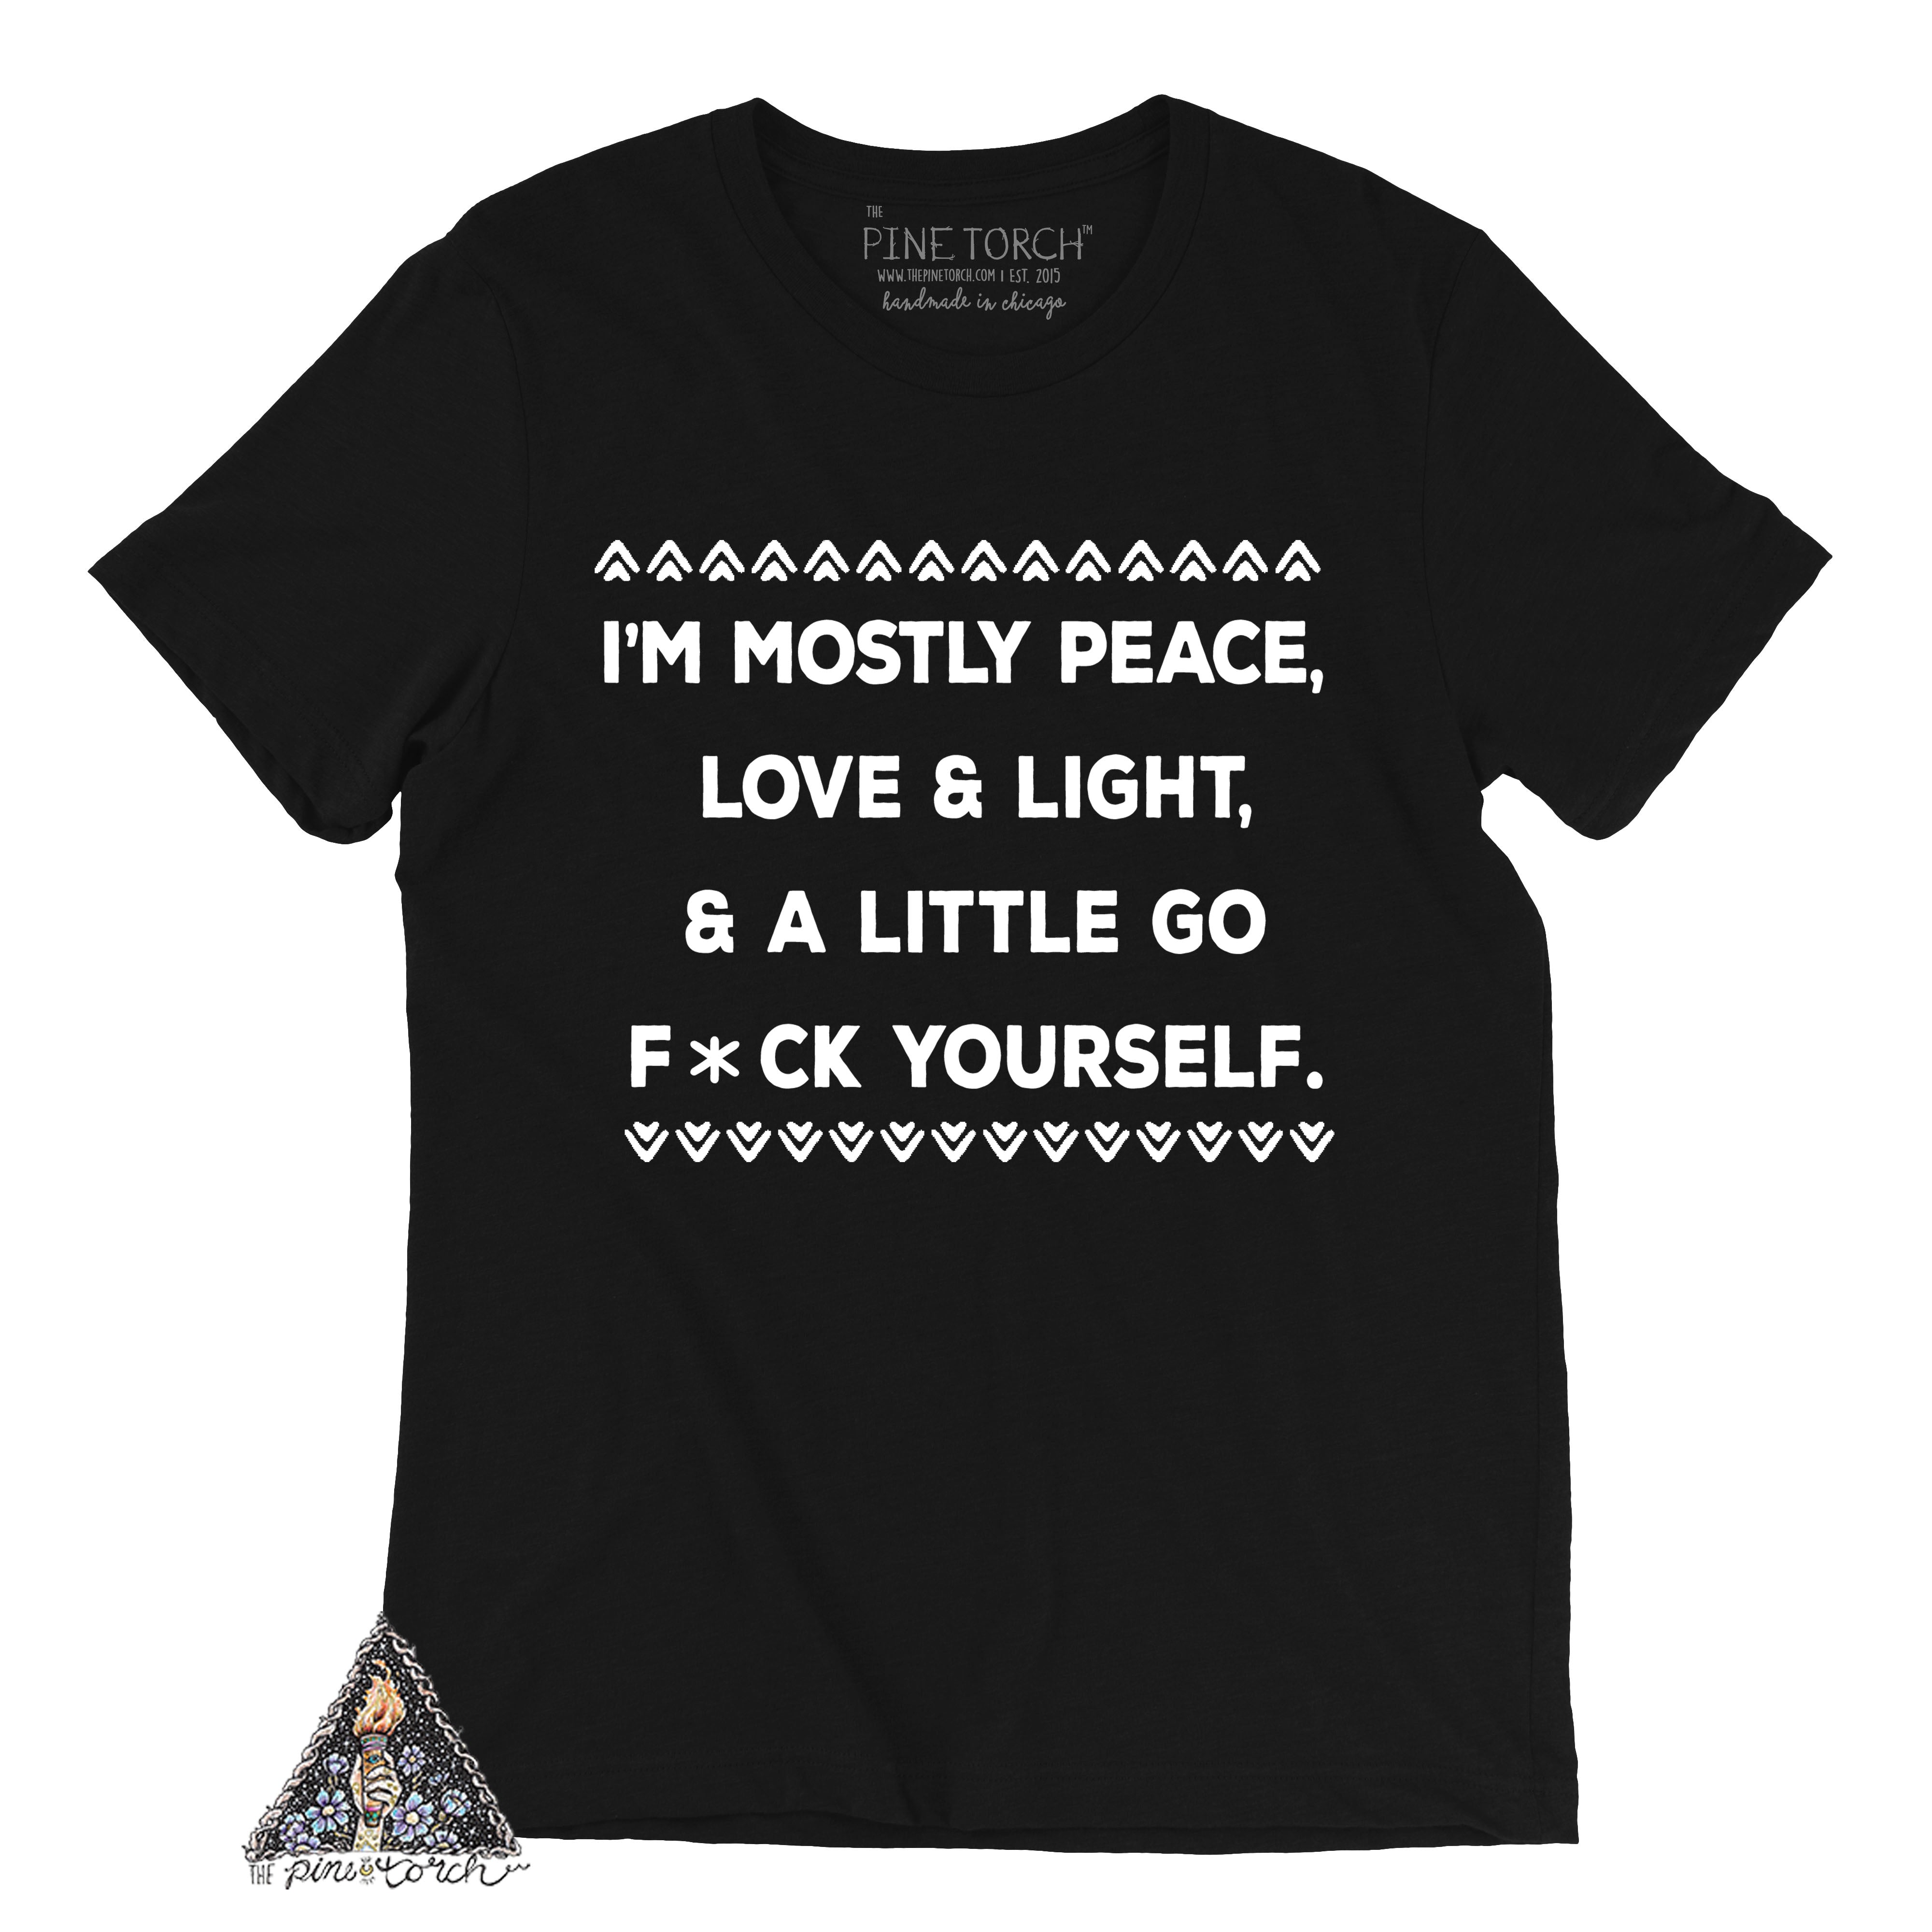 « I'M MOSTLY PEACE, LOVE & LIGHT & A LITTLE GO F*CK YOURSELF » UNISEX TEE